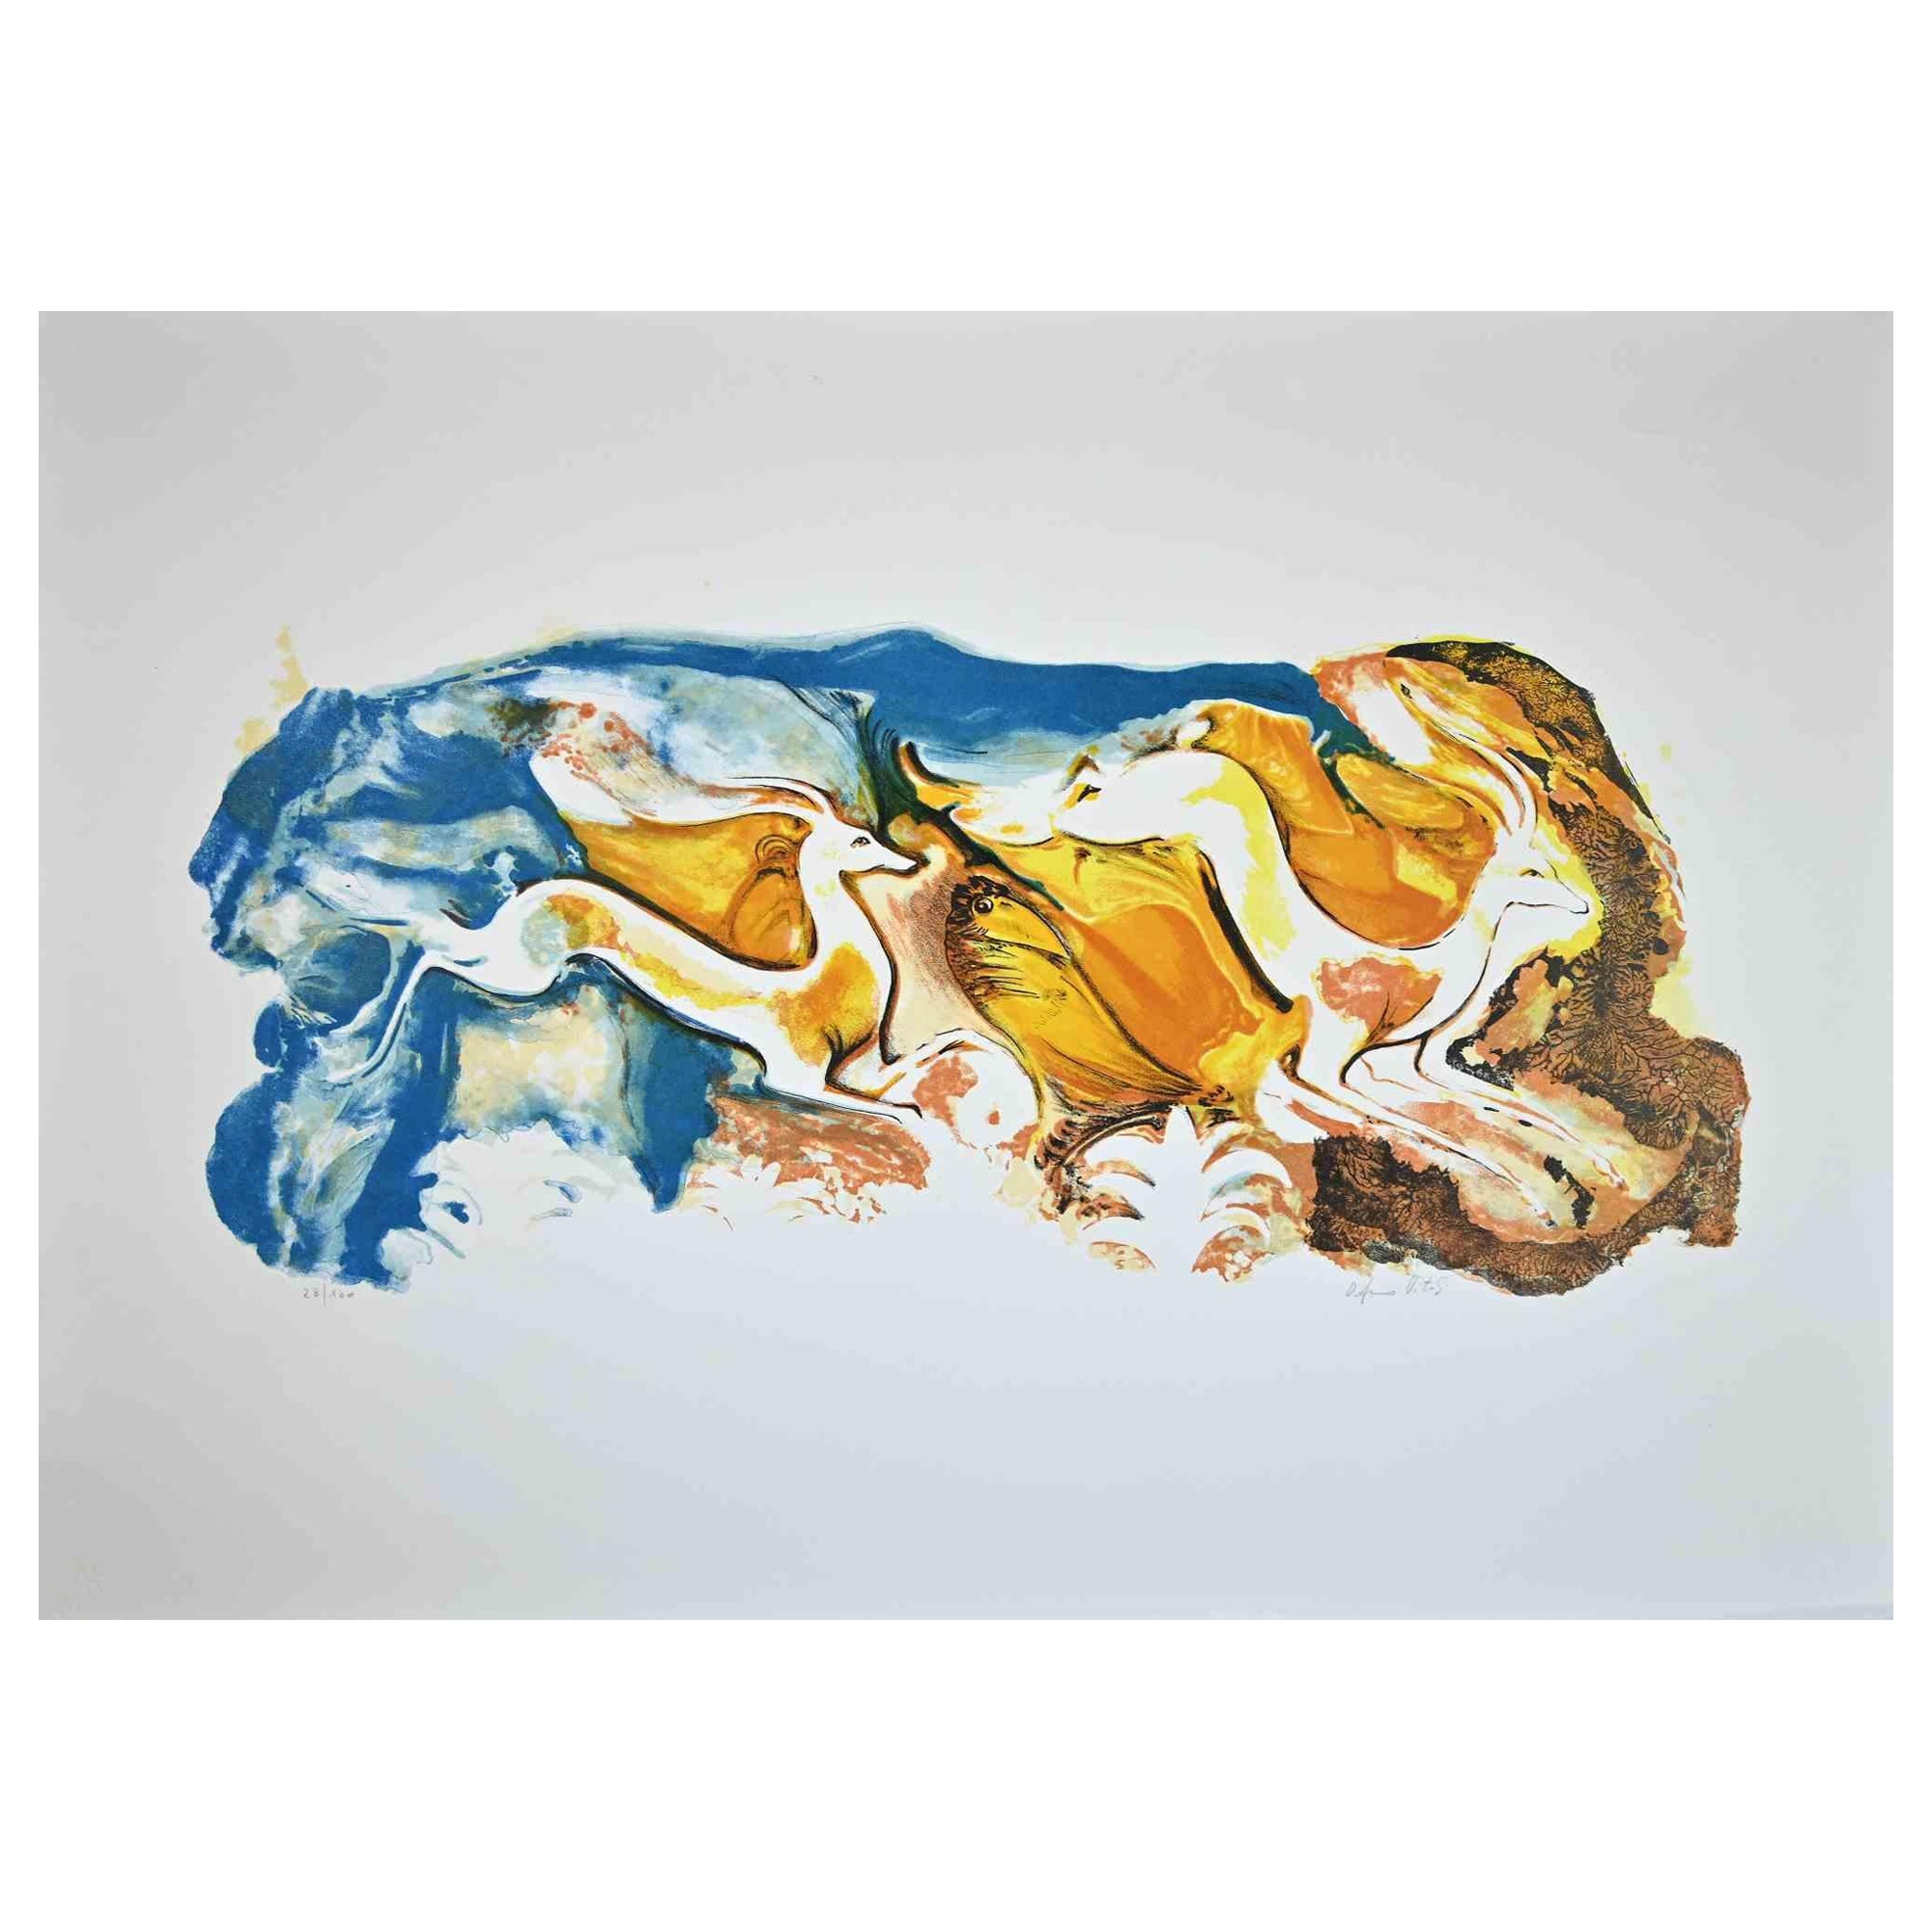 Deers is an original Lithograph realized by Orfeo Vitali in 1970.

Hand-signed.

Numbered. Edition, 23/100.

The artwork is depicted in harmonious colors in a well-balanced composition.